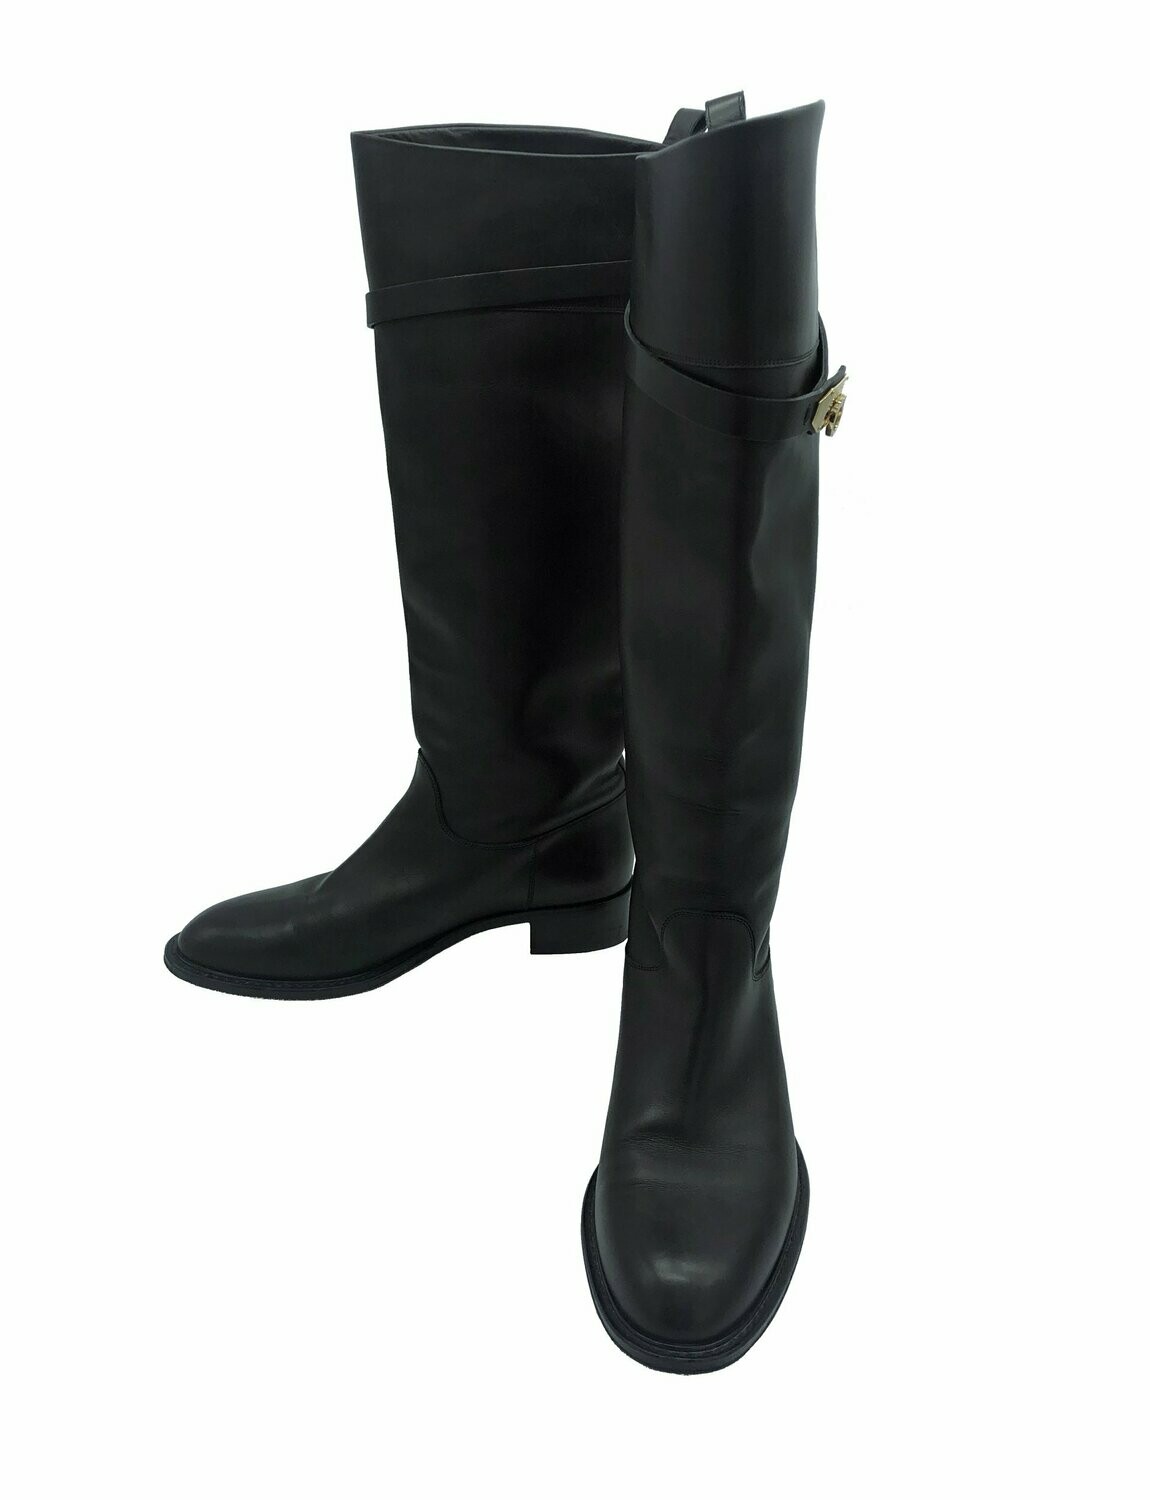 Salvatore Ferragamo Knee High Boots with Gold Gancini Clasp Detail UK 6